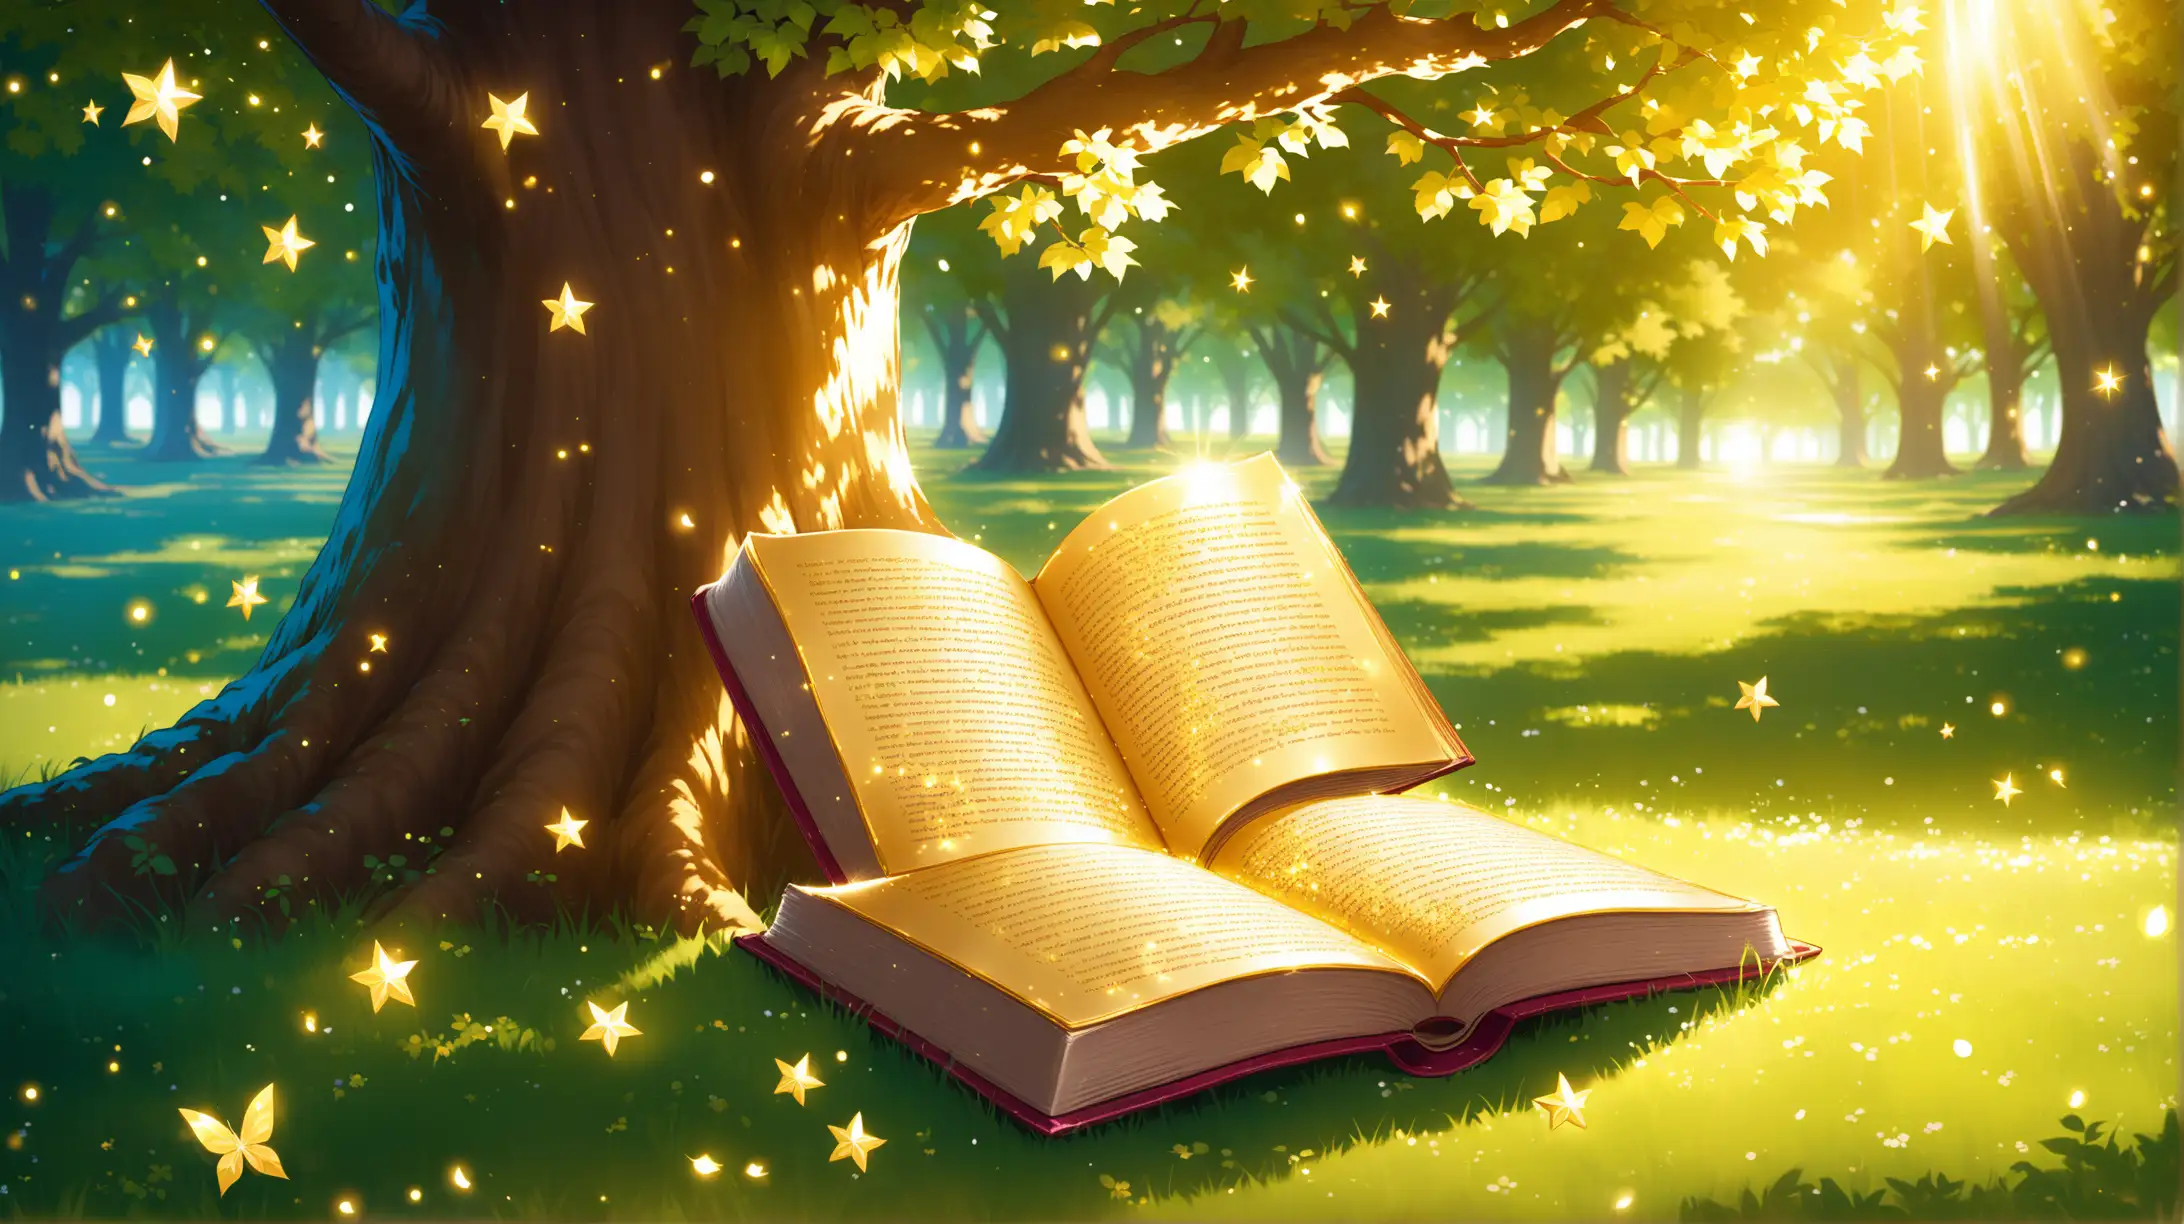 Enchanted Book with Golden Pages Beneath a Majestic Tree